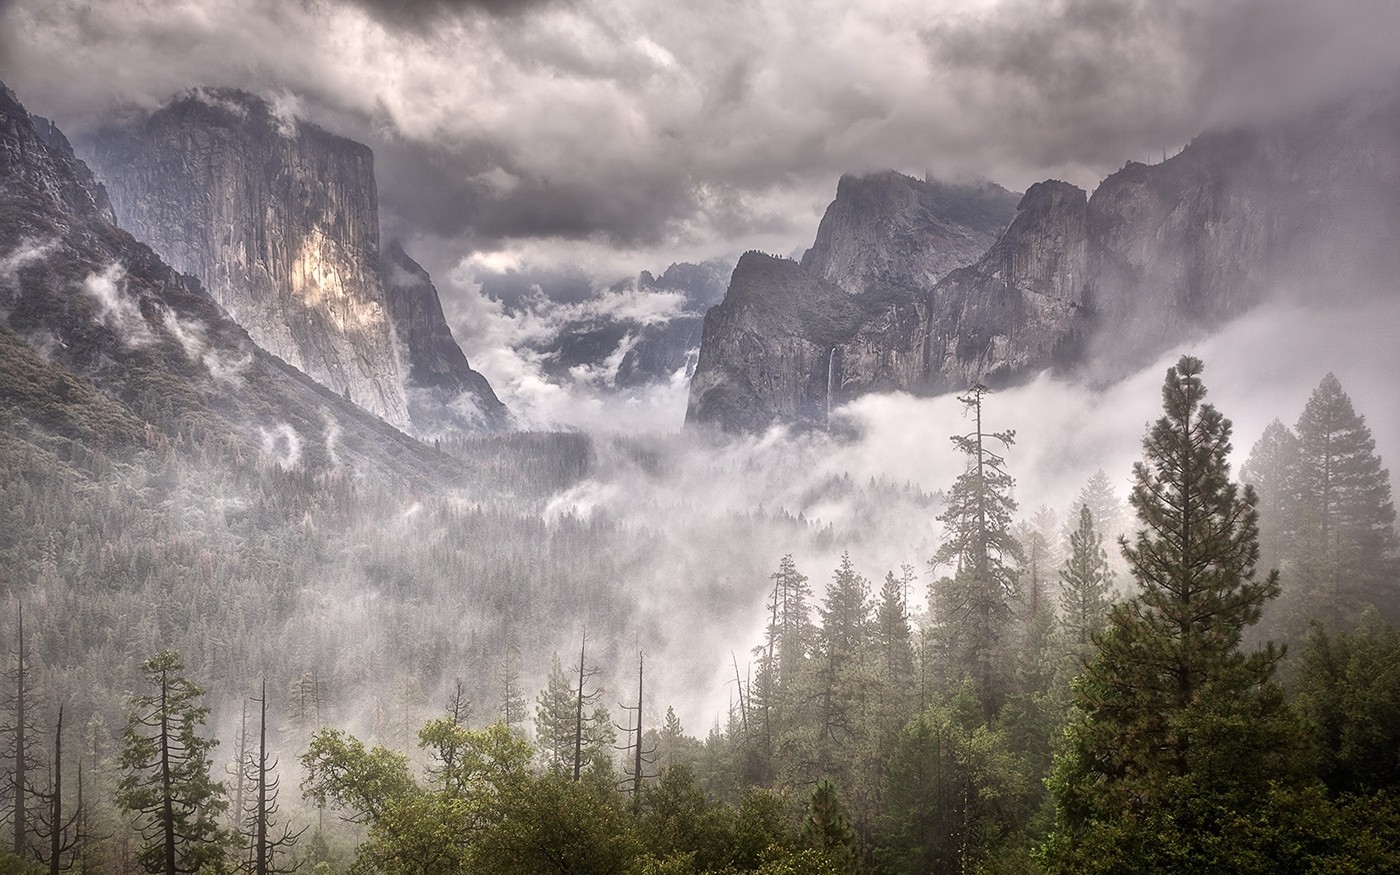 General 1400x875 nature landscape mountains forest mist daylight clouds Yosemite Valley USA California El Capitan